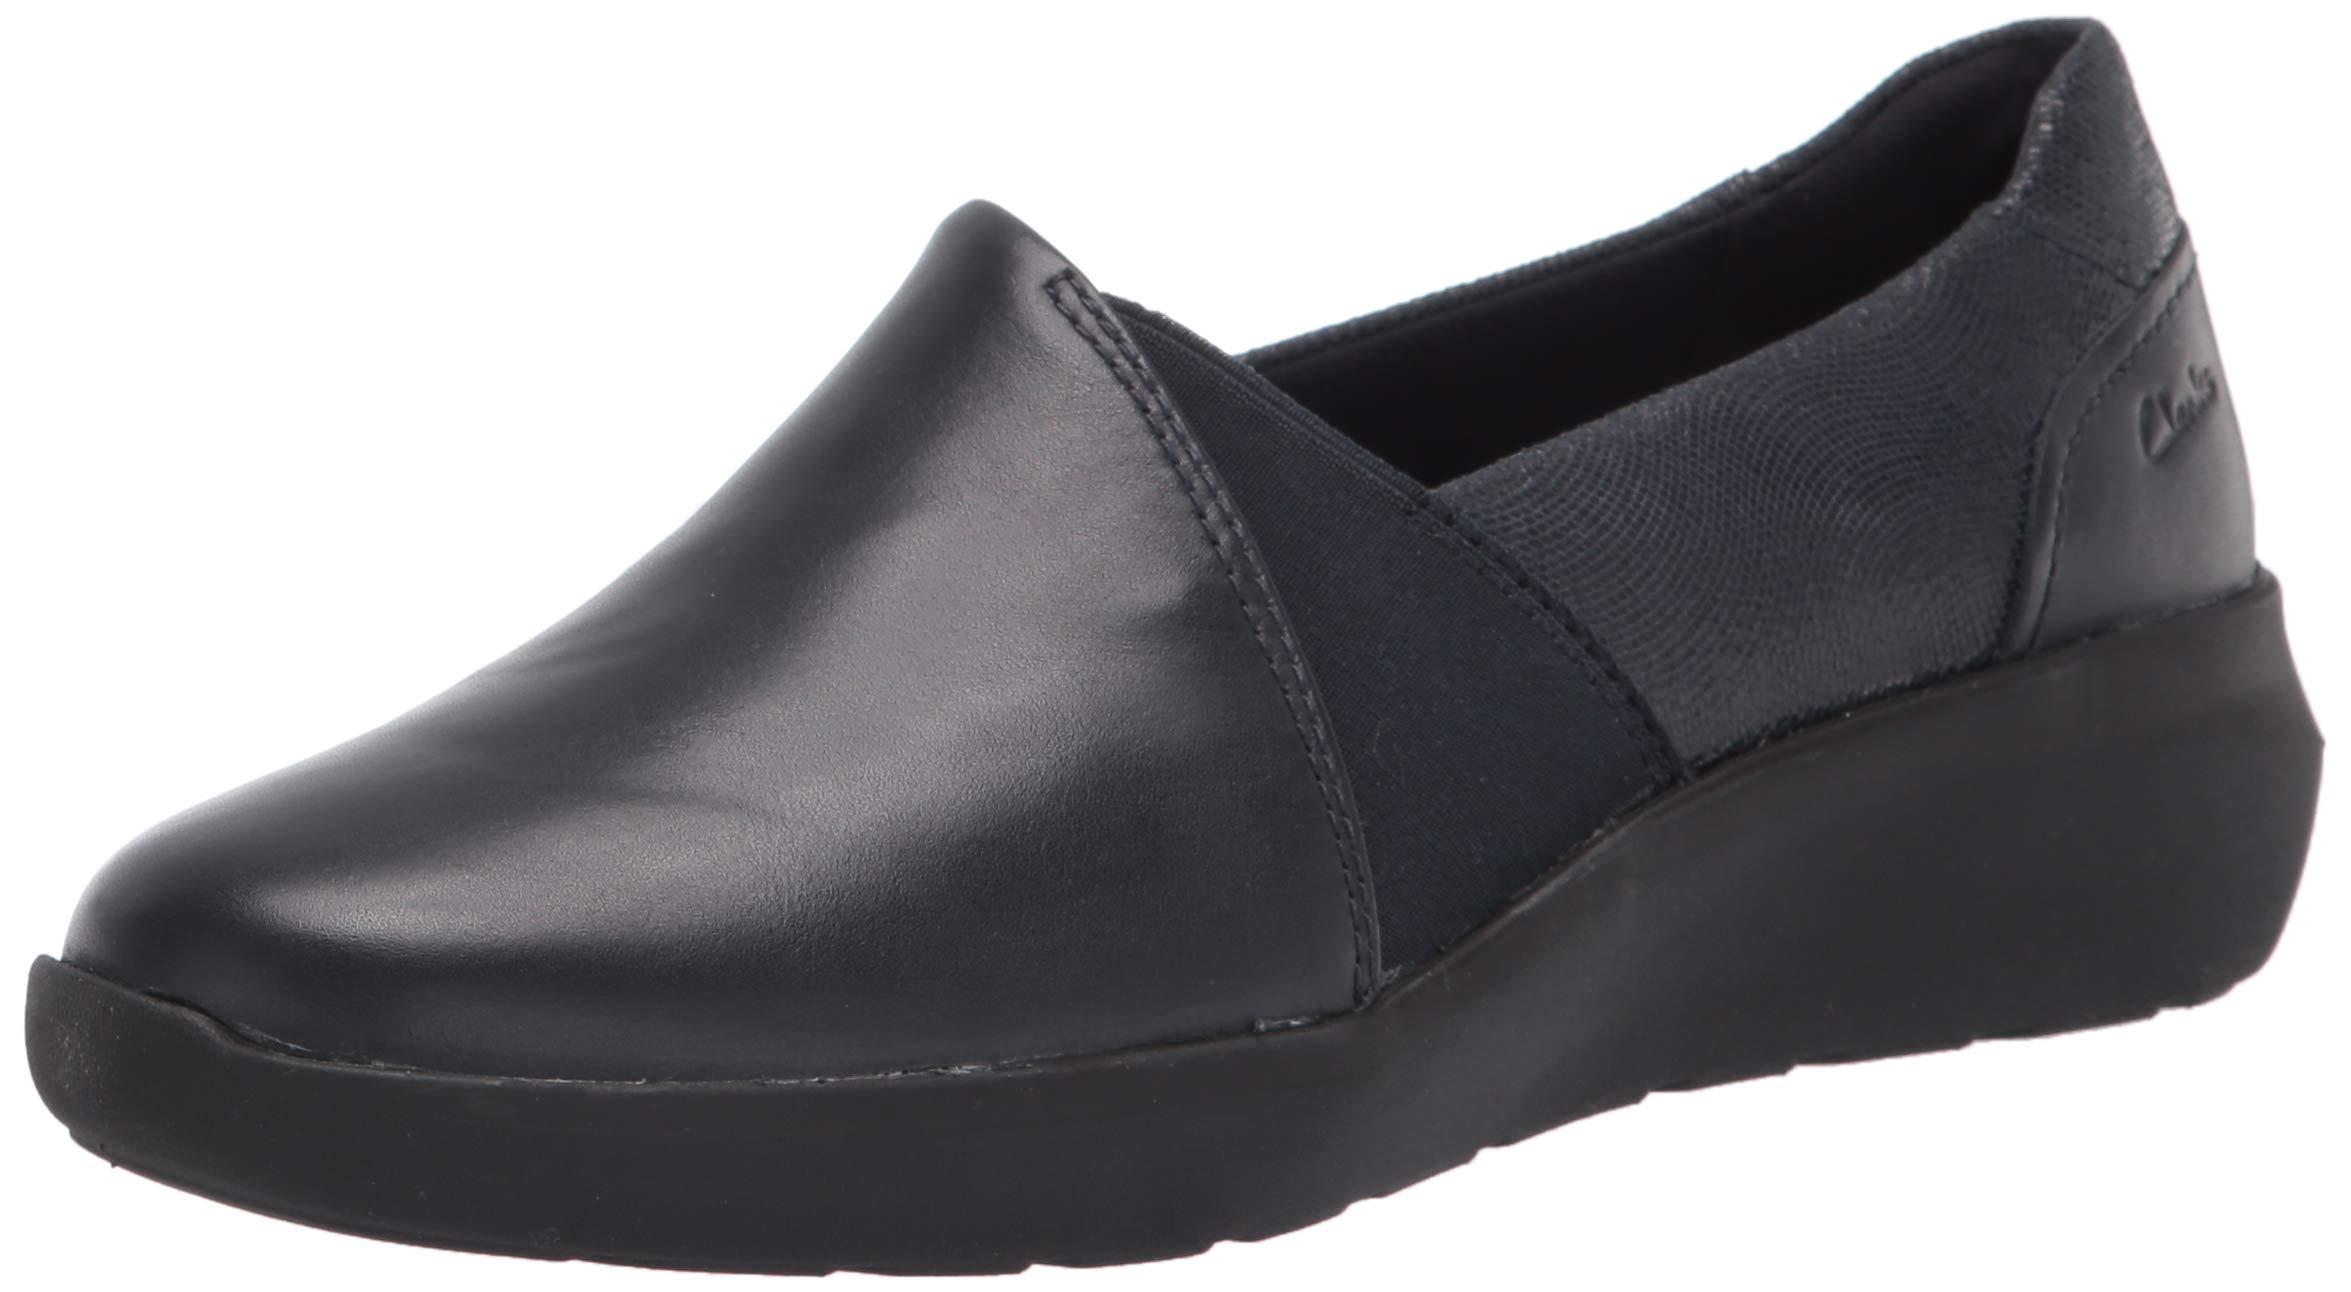 Clarks Women's Kayleigh Step Loafer US